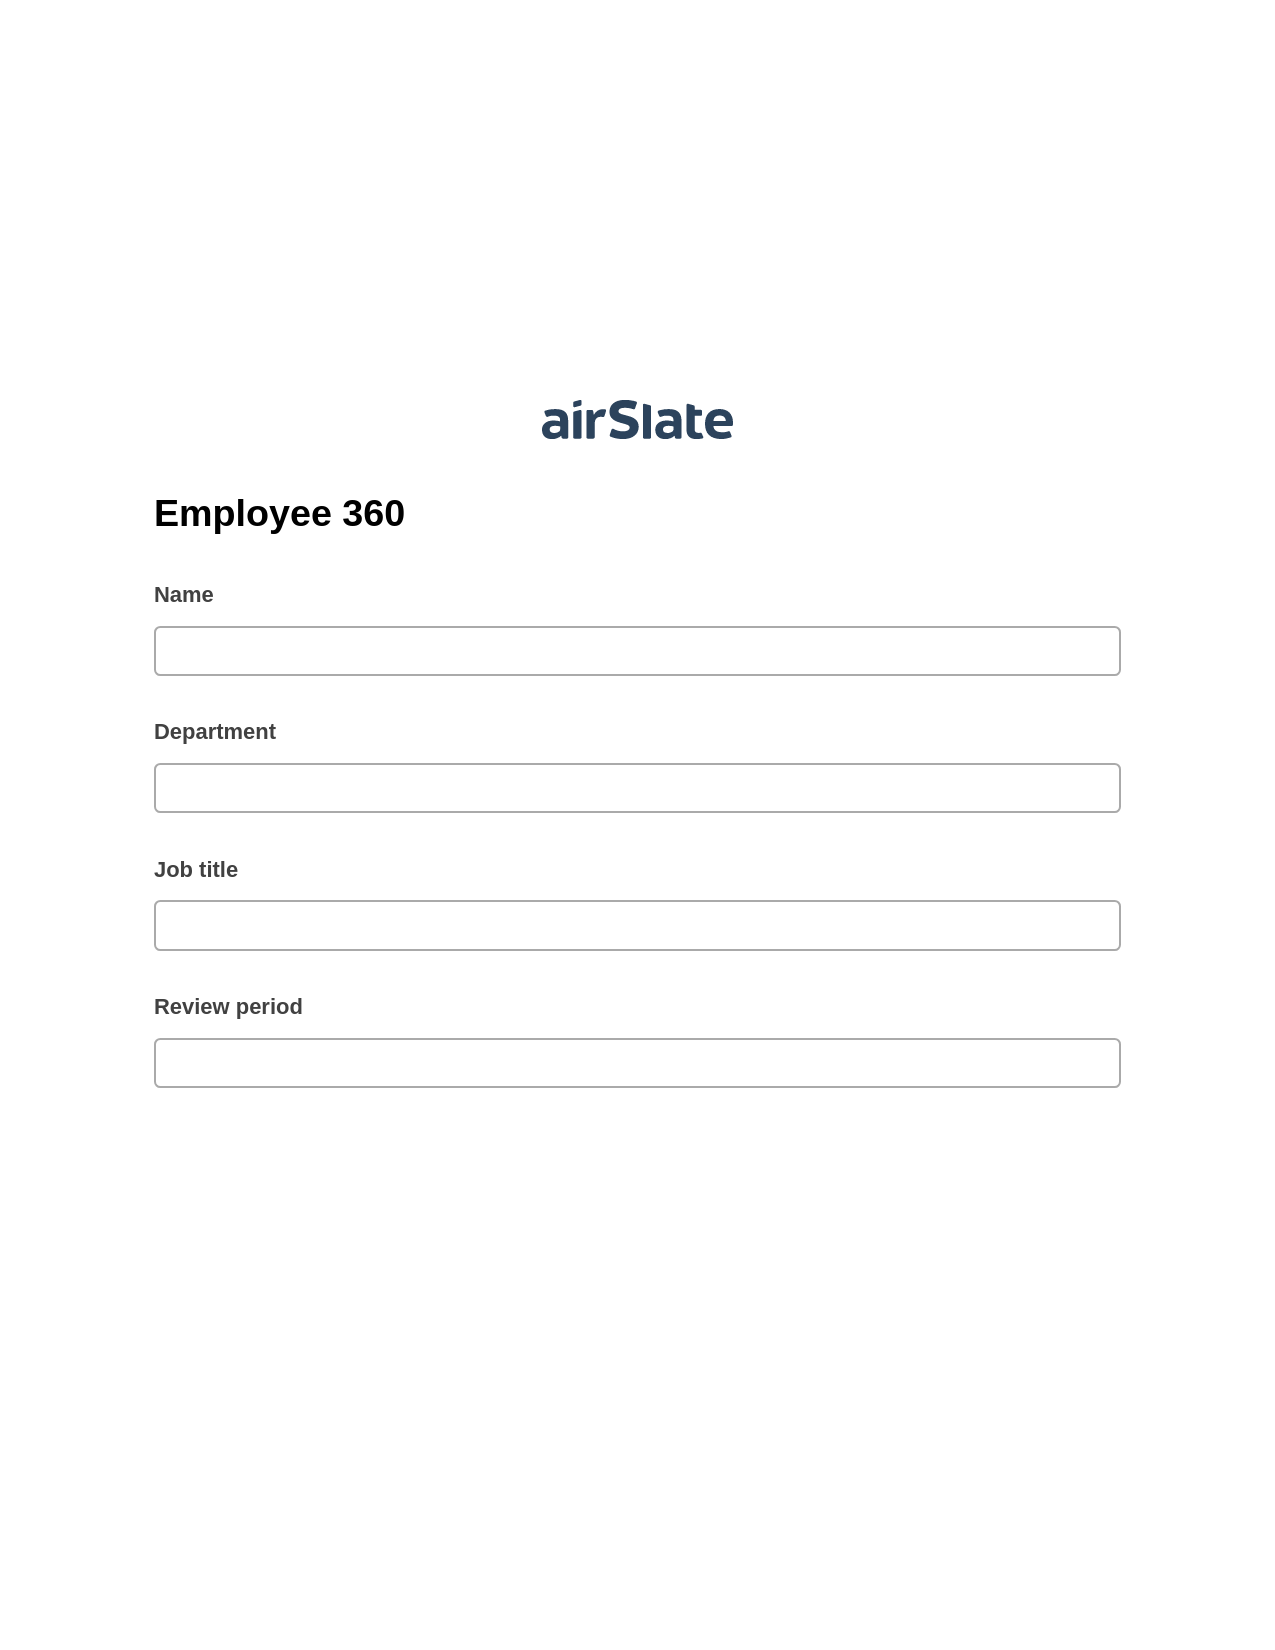 Employee 360 Pre-fill Dropdowns from Google Sheet Bot, Update MS Dynamics 365 Record Bot, Archive to Google Drive Bot